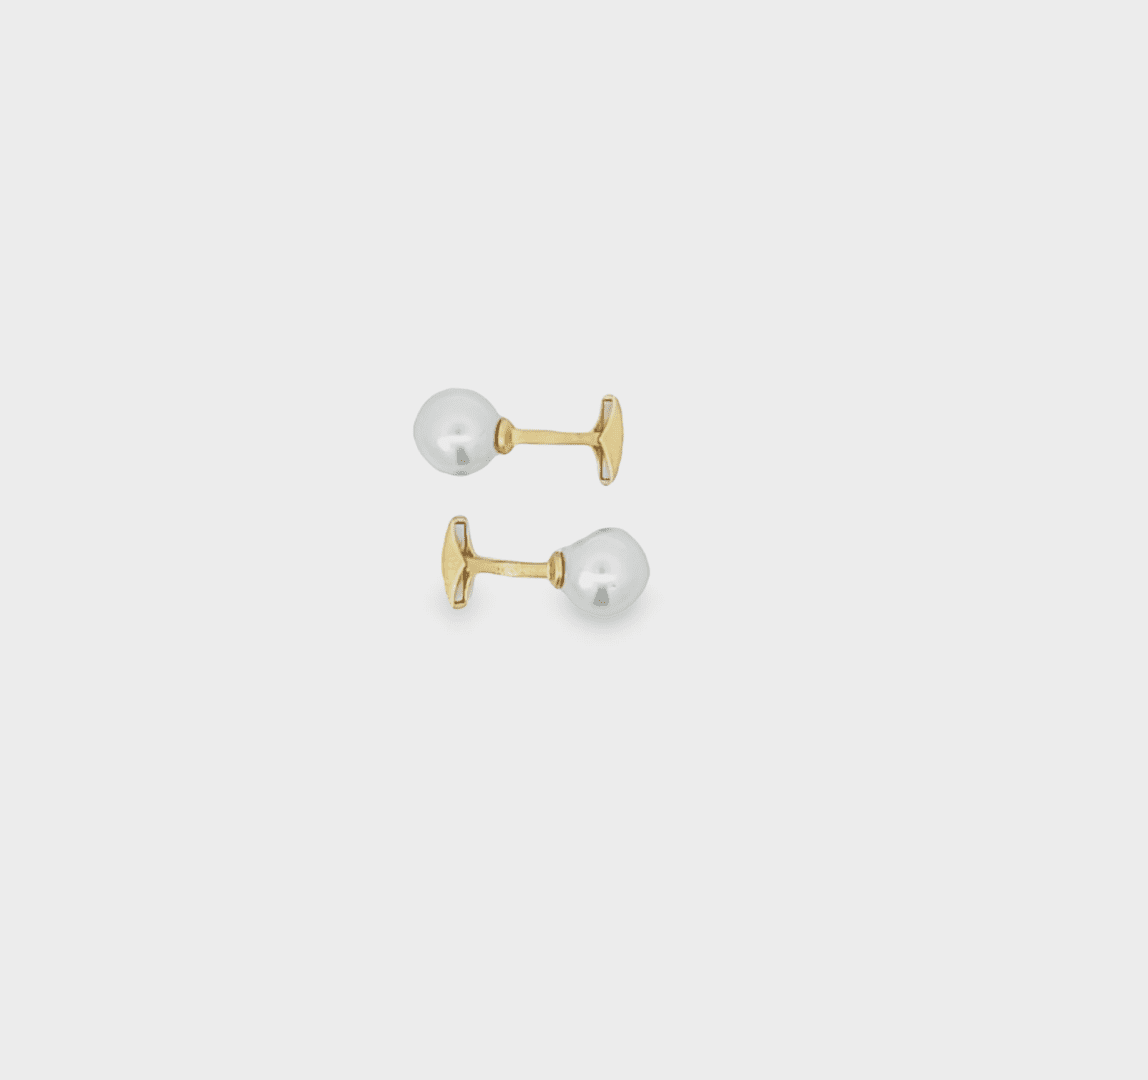 18kt Yellow Gold Cuff Link with 14mm White South Sea Pearl